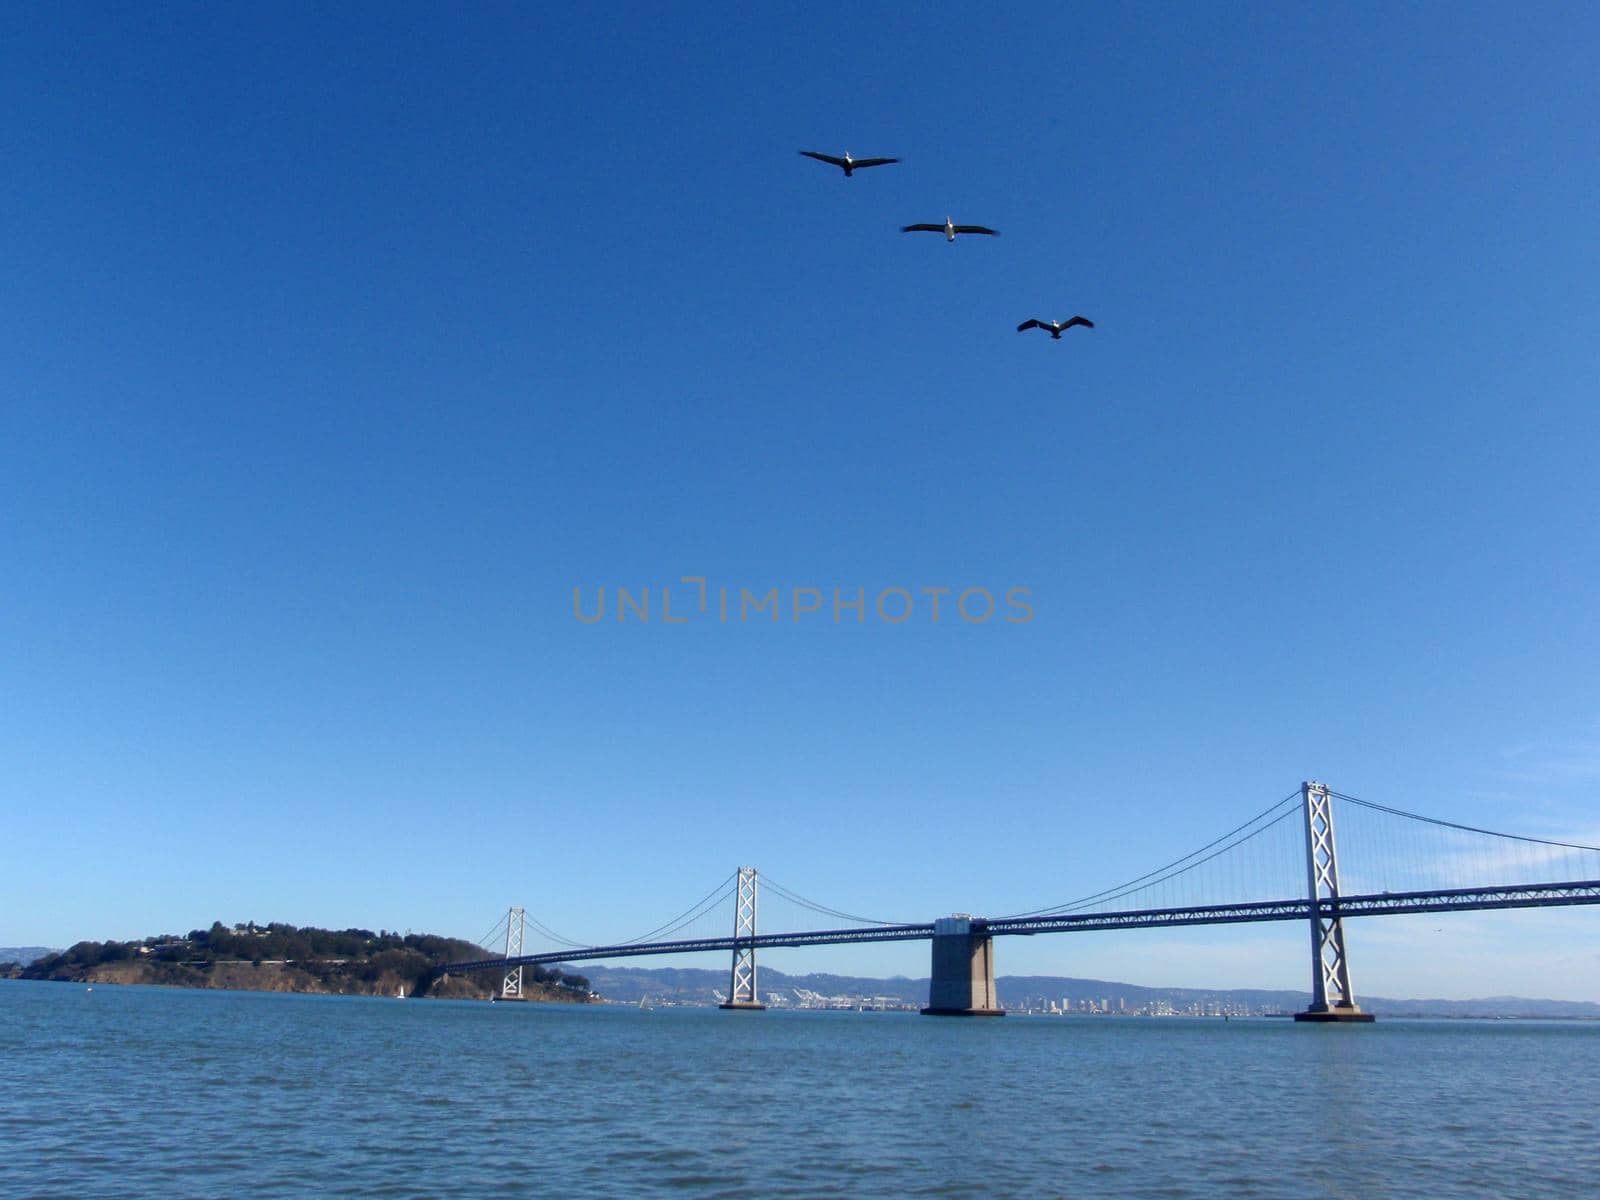 Three Seagulls fly in front of the San Francisco side of Bay Bridge by EricGBVD